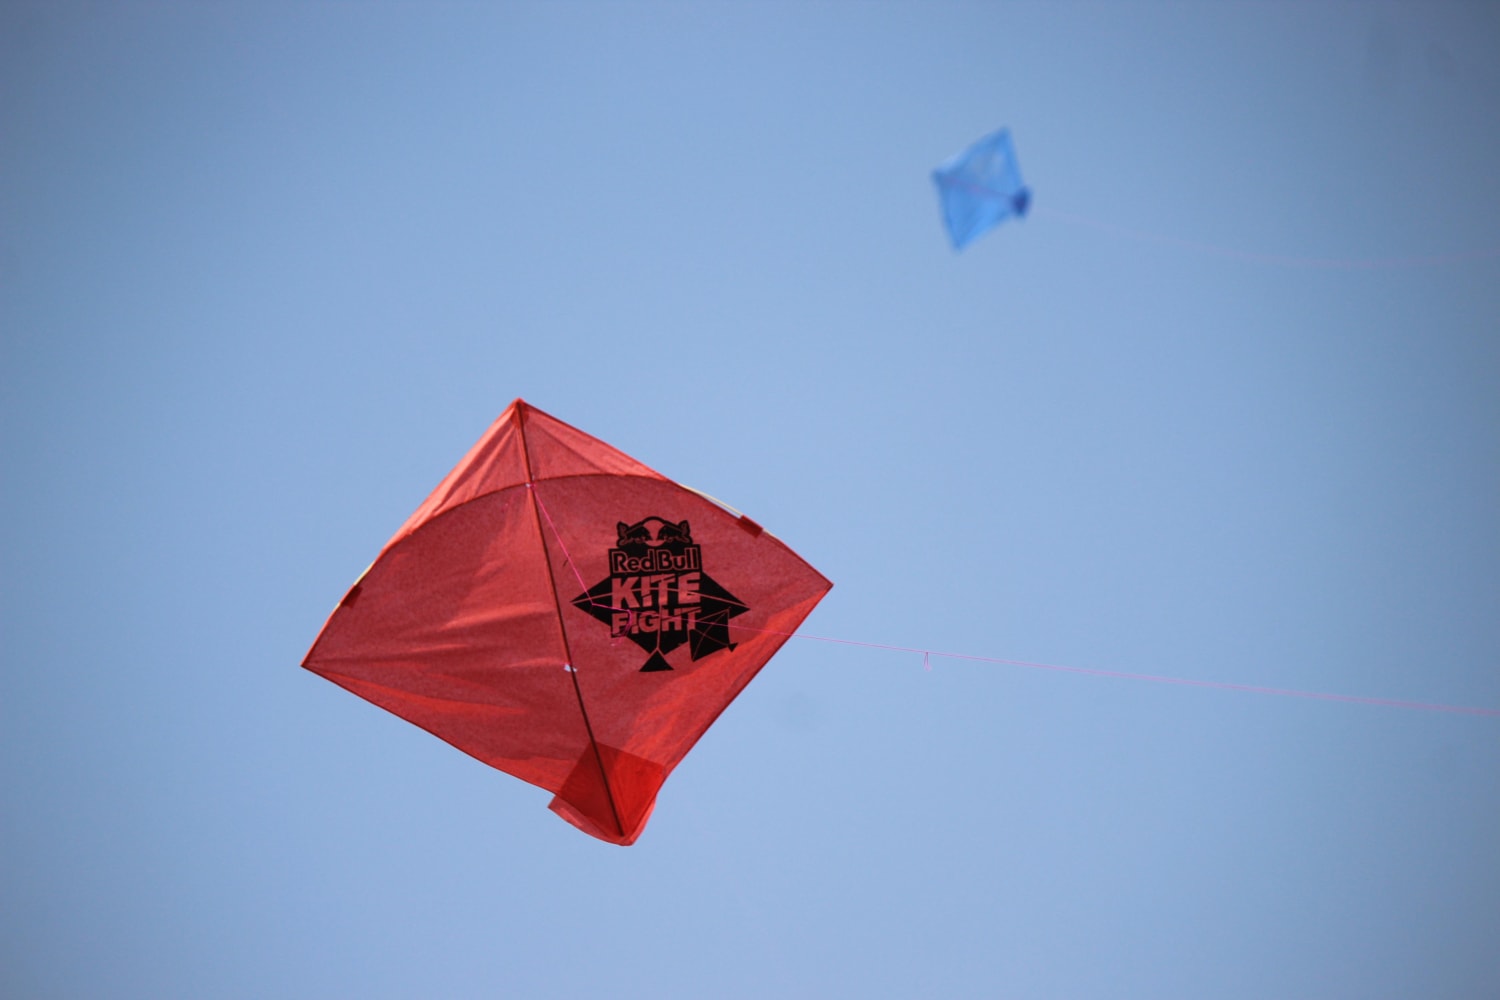 Red Bull Kite Fight 2019: Results